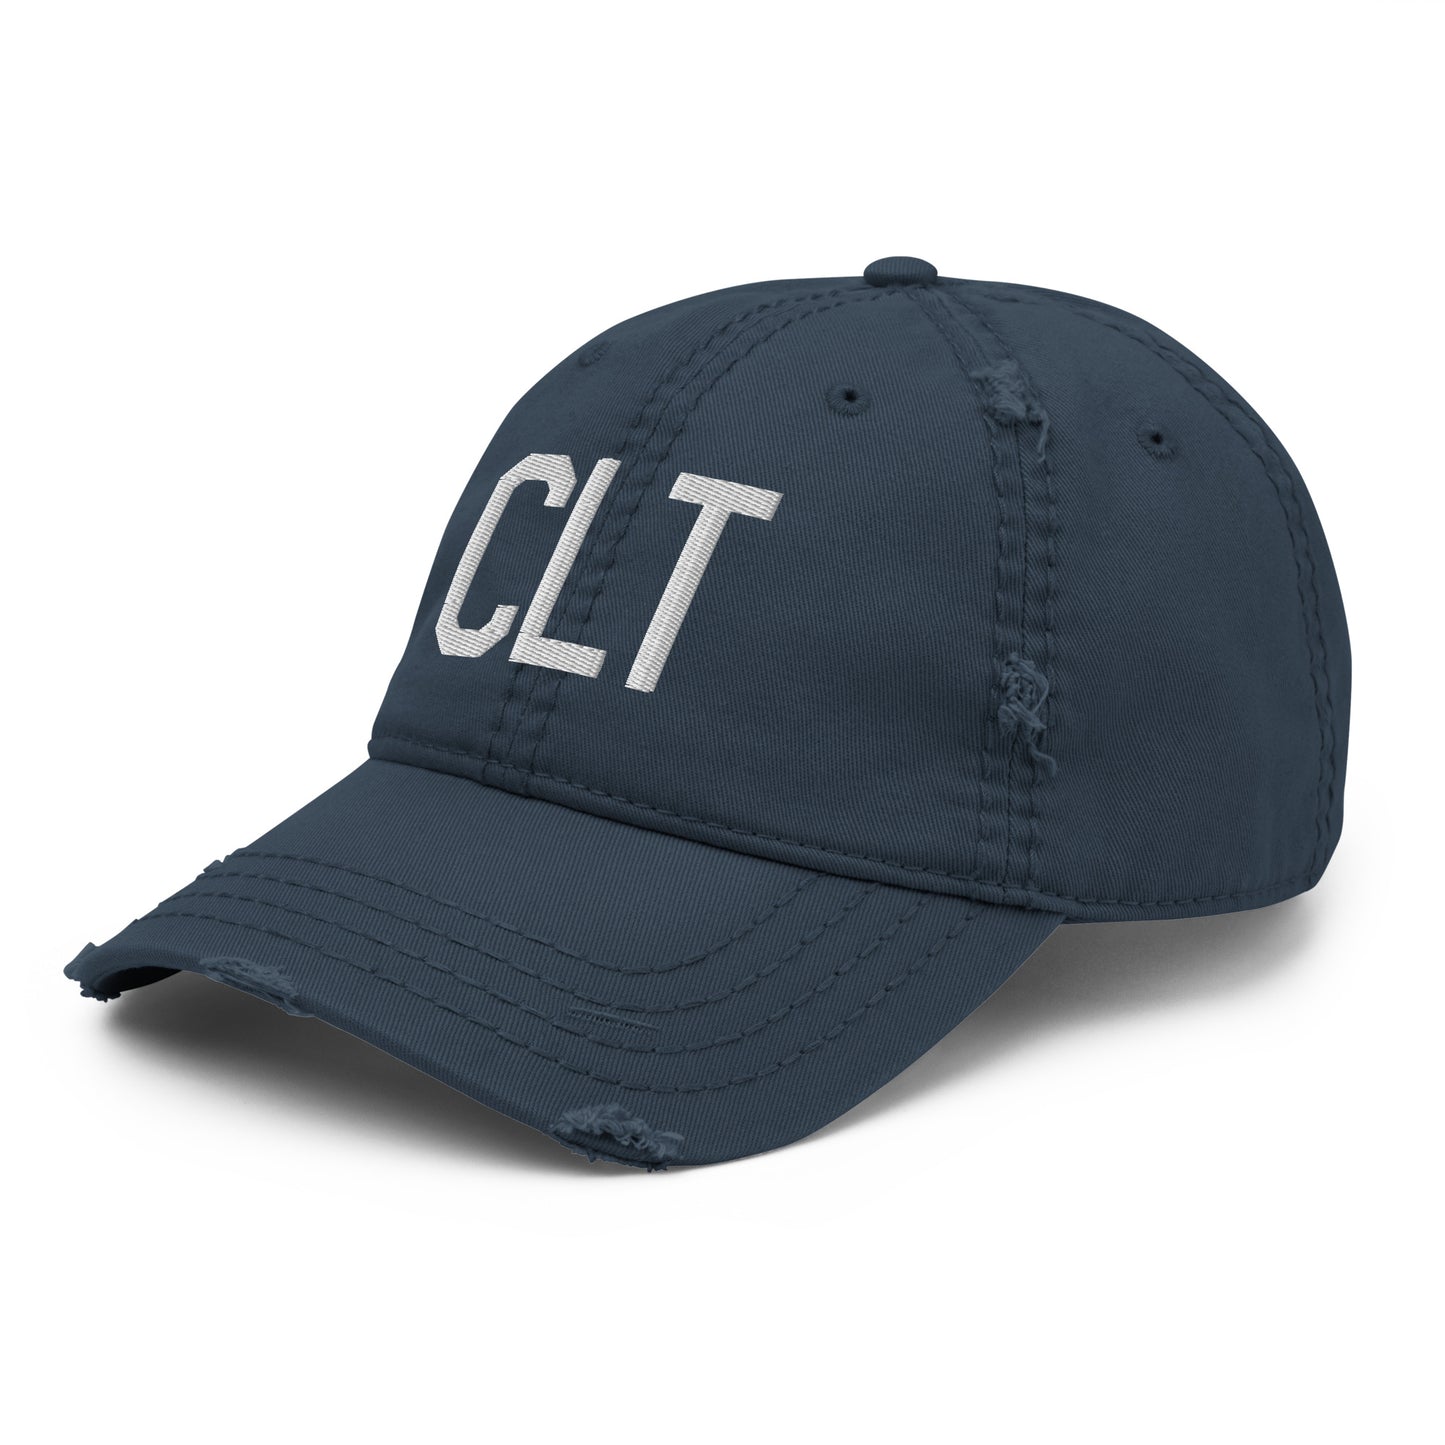 Airport Code Distressed Hat - White • CLT Charlotte • YHM Designs - Image 01